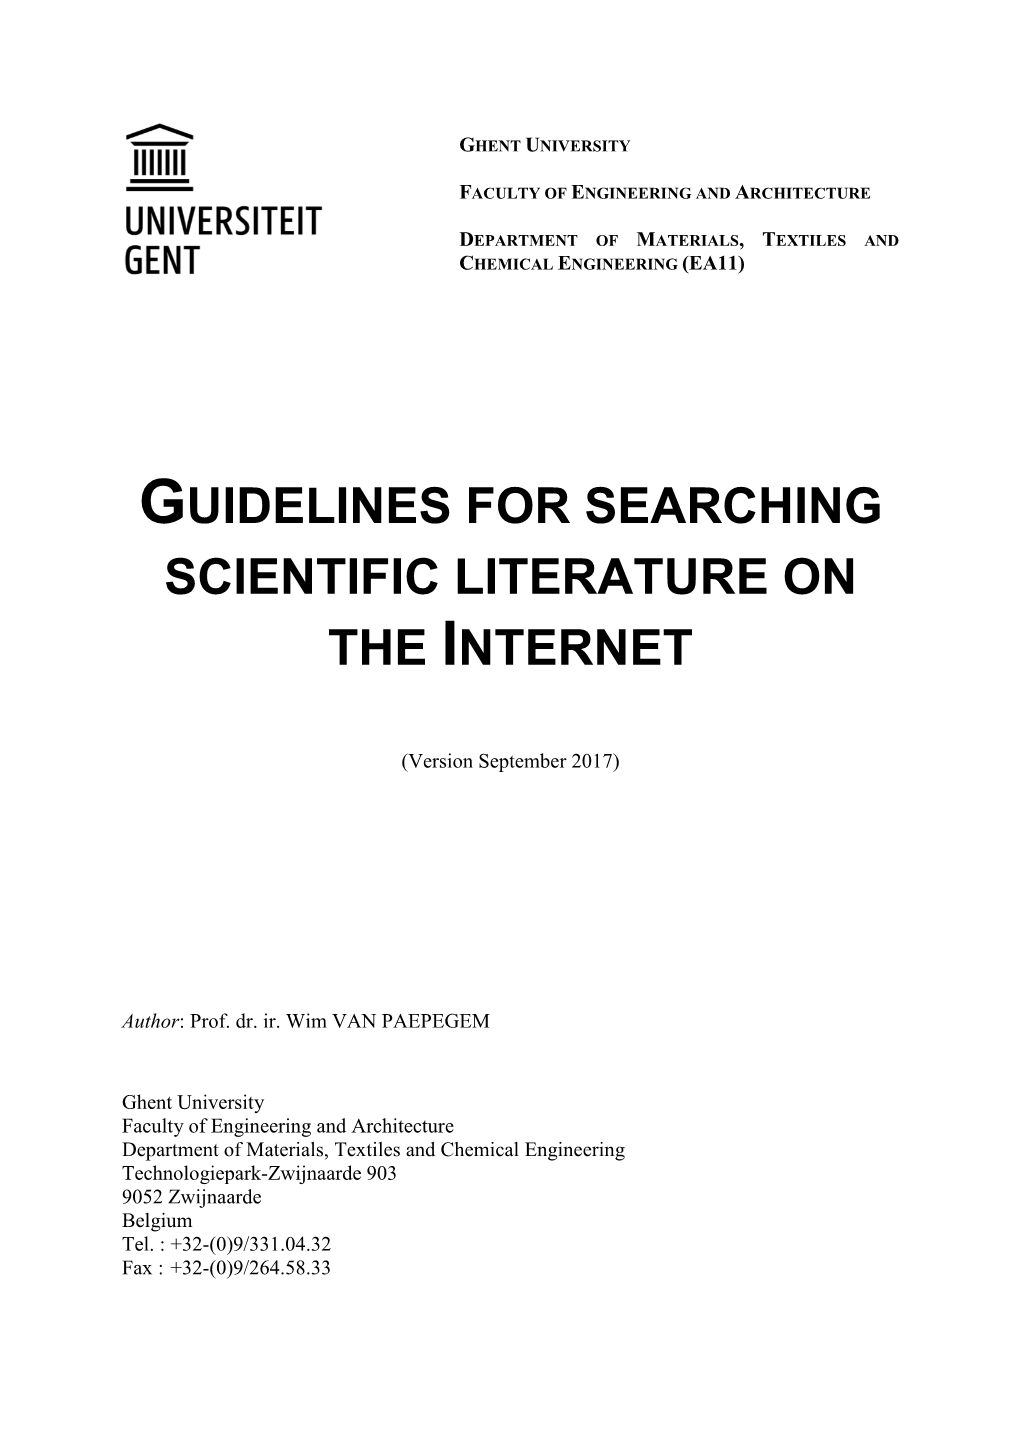 Guidelines for Searching Scientific Literature on the Internet